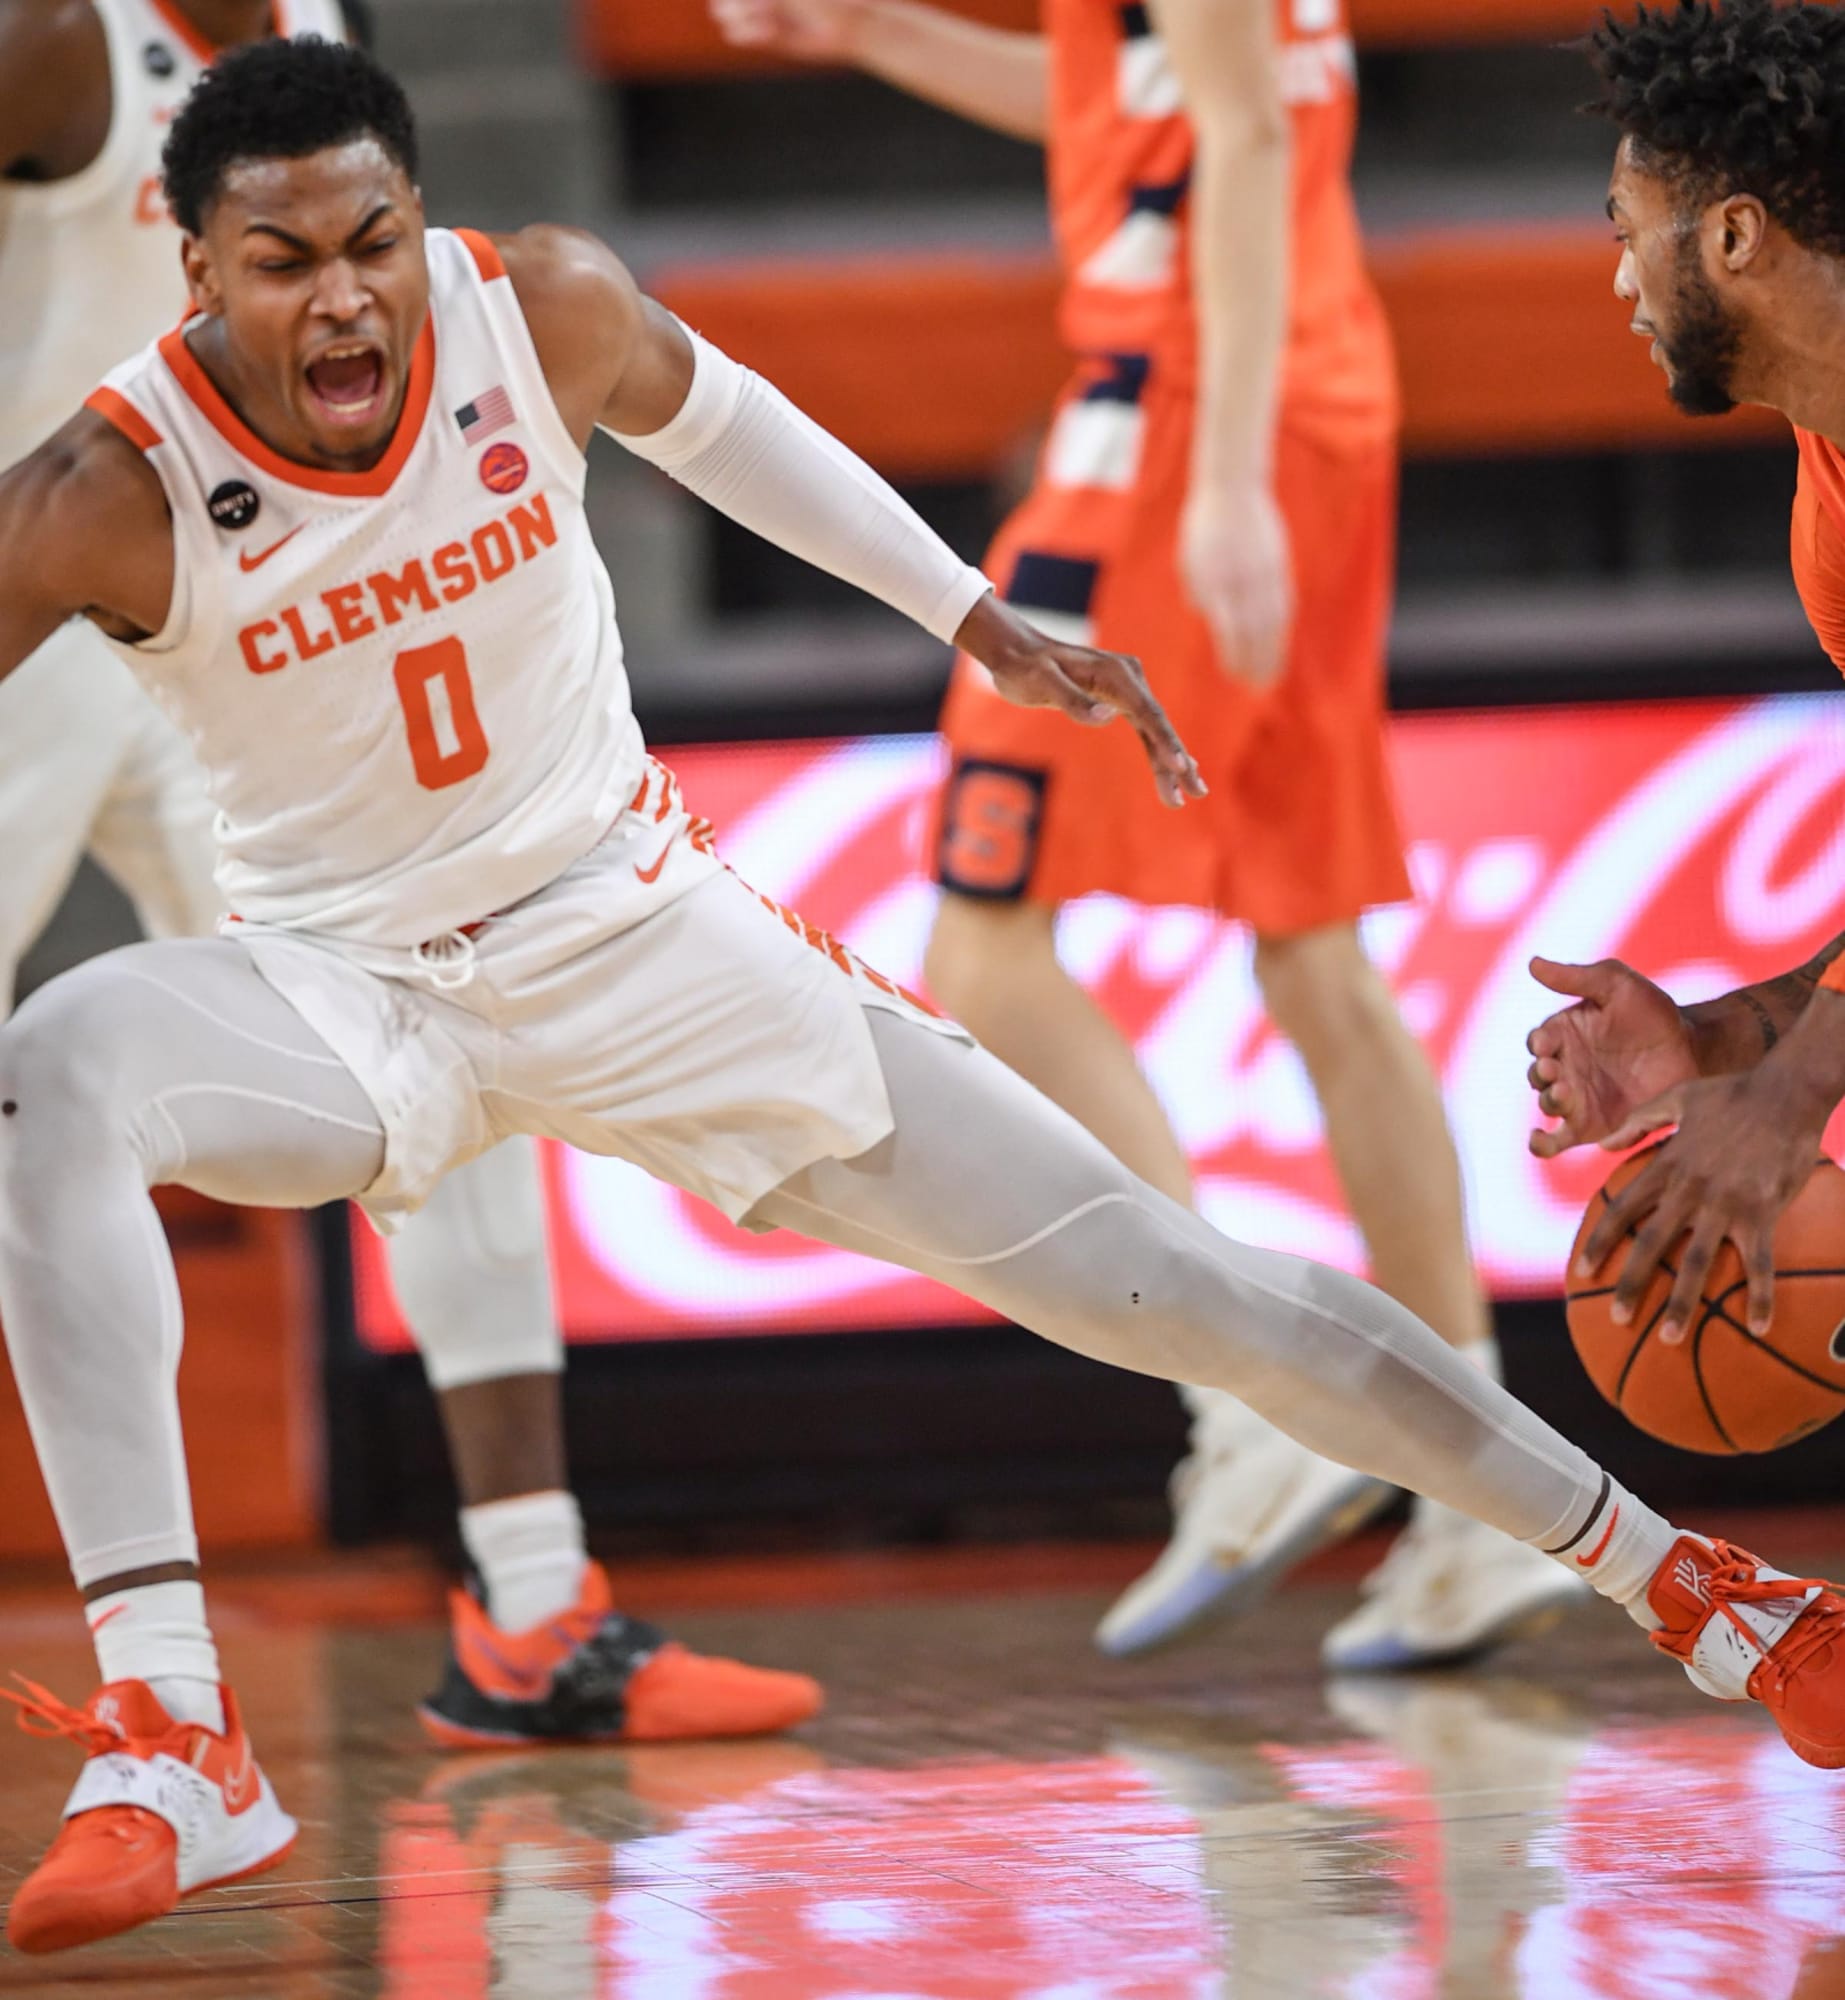 Clemson basketball Tigers win their second straight game